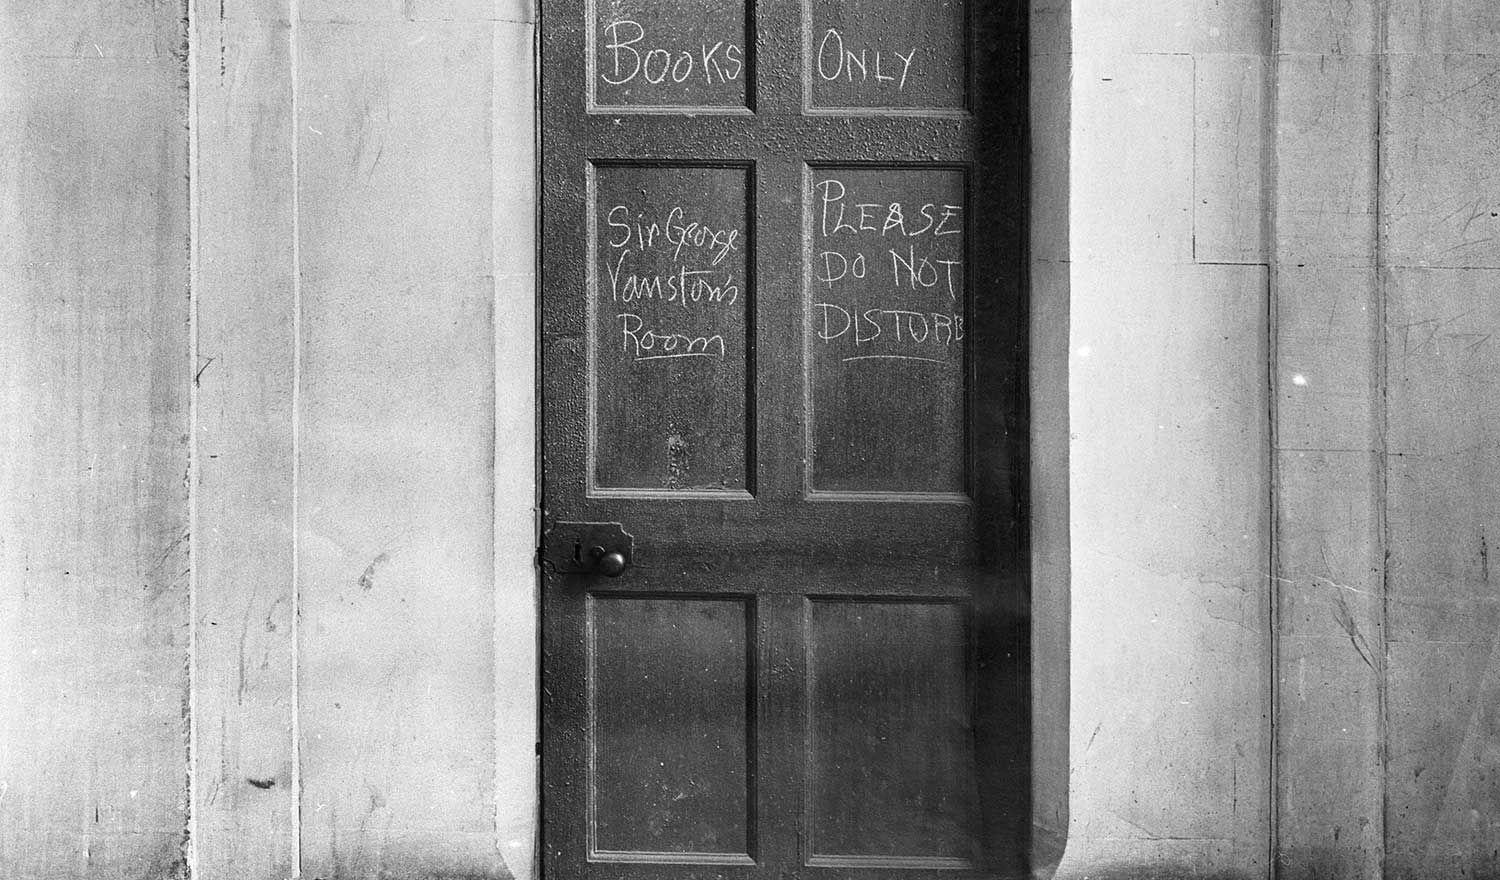 Graffiti on a door in the Custom House recorded following it’s destruction on 25 May 1921. ©Photographic Archive, National Monuments Service, Government of Ireland.